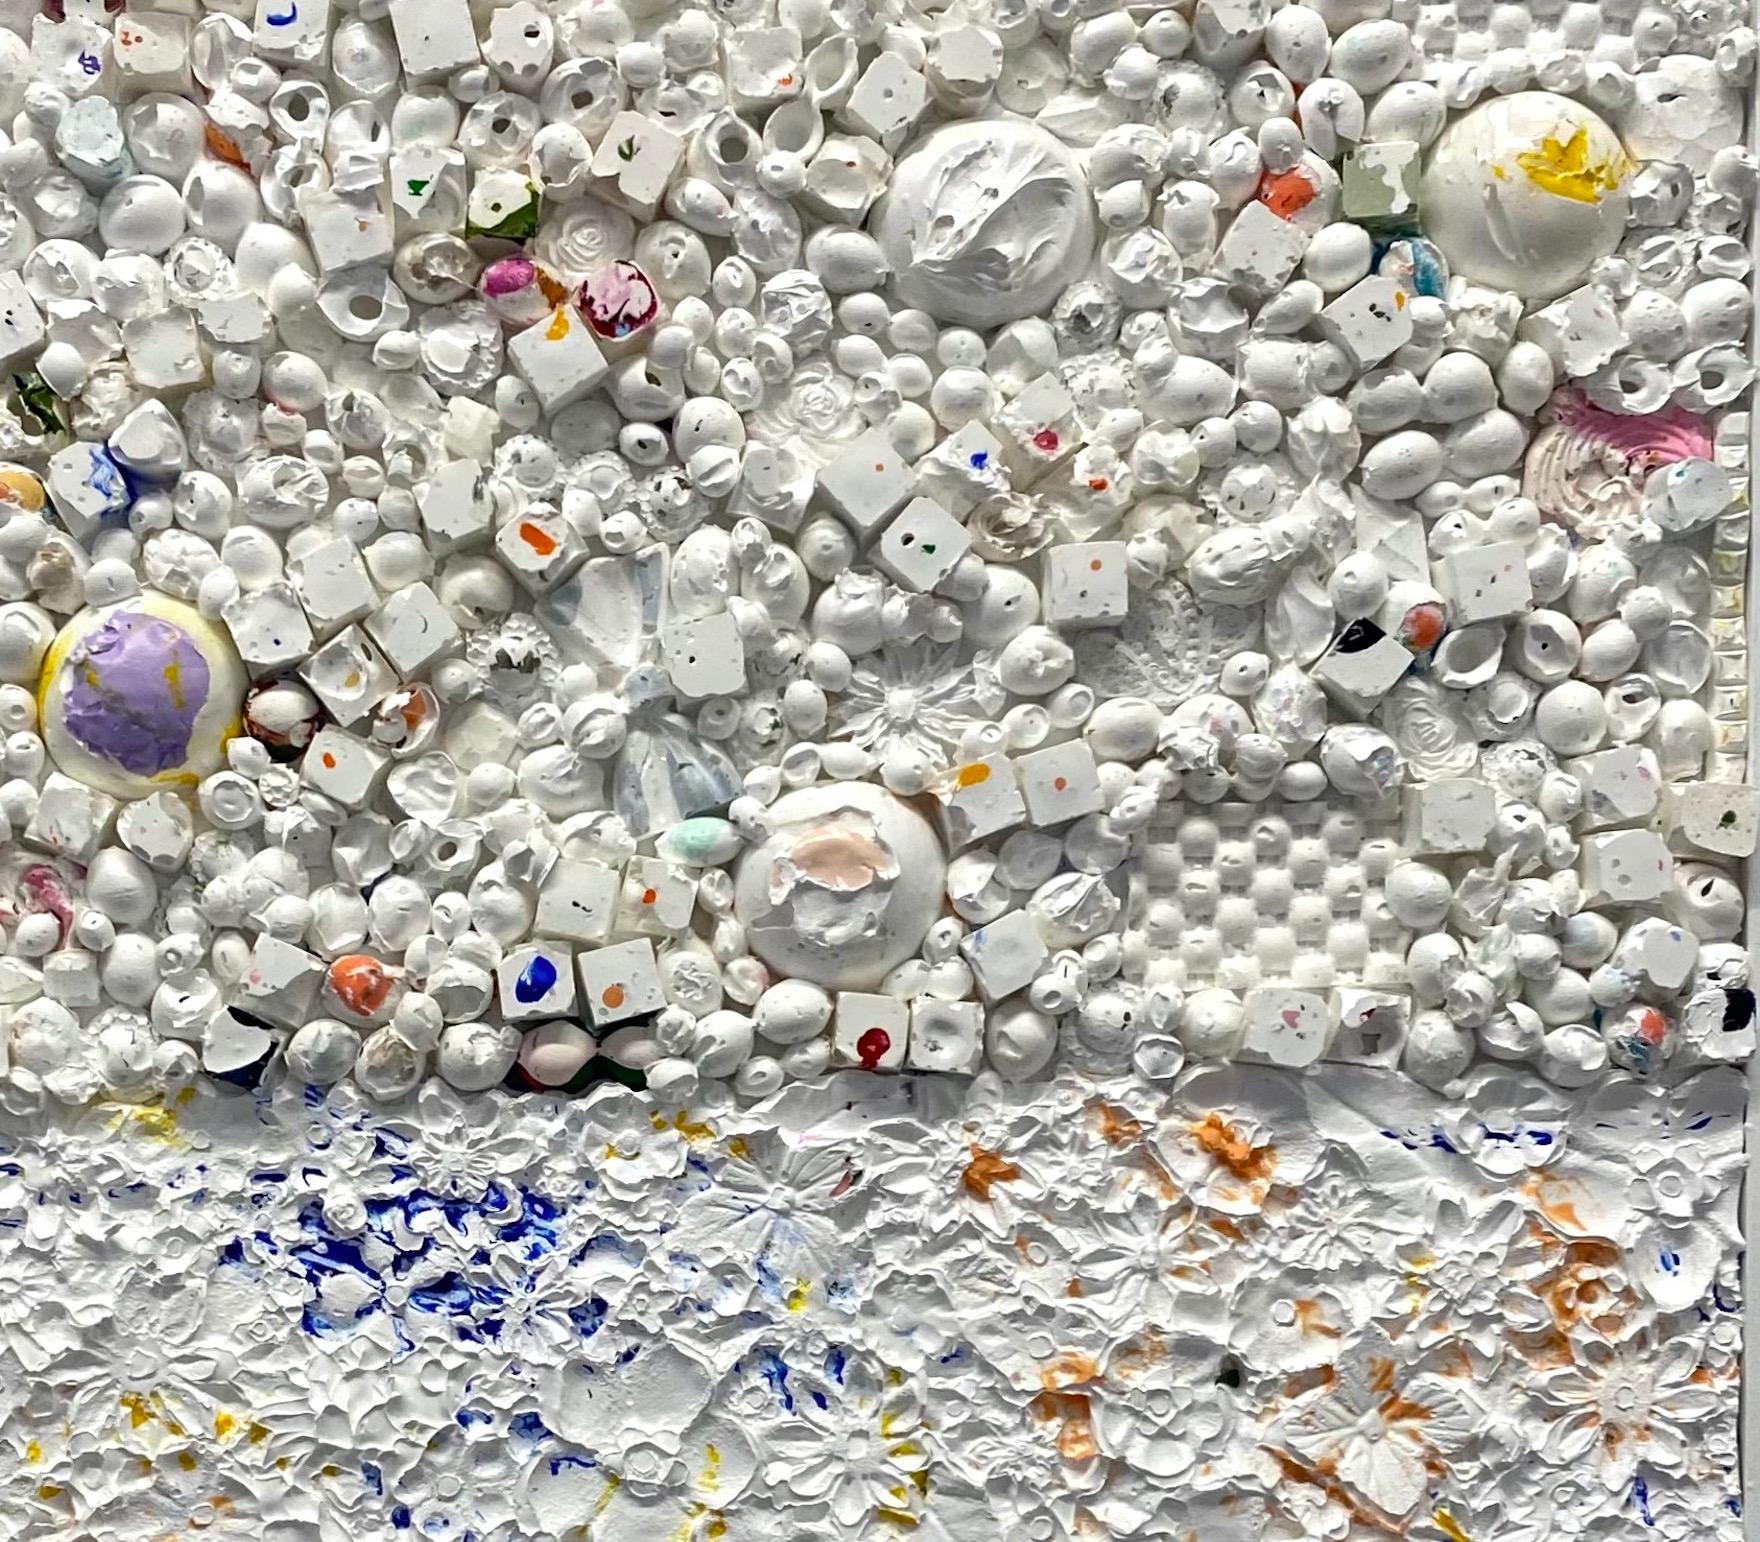 This heavily textured painting by Natalie Harrison is composed of hundreds of small acrylic molds. In this painting, she utilizes white acrylic paint to layer on top of brightly colored acrylic molds. The discrepancies in texture create a highly